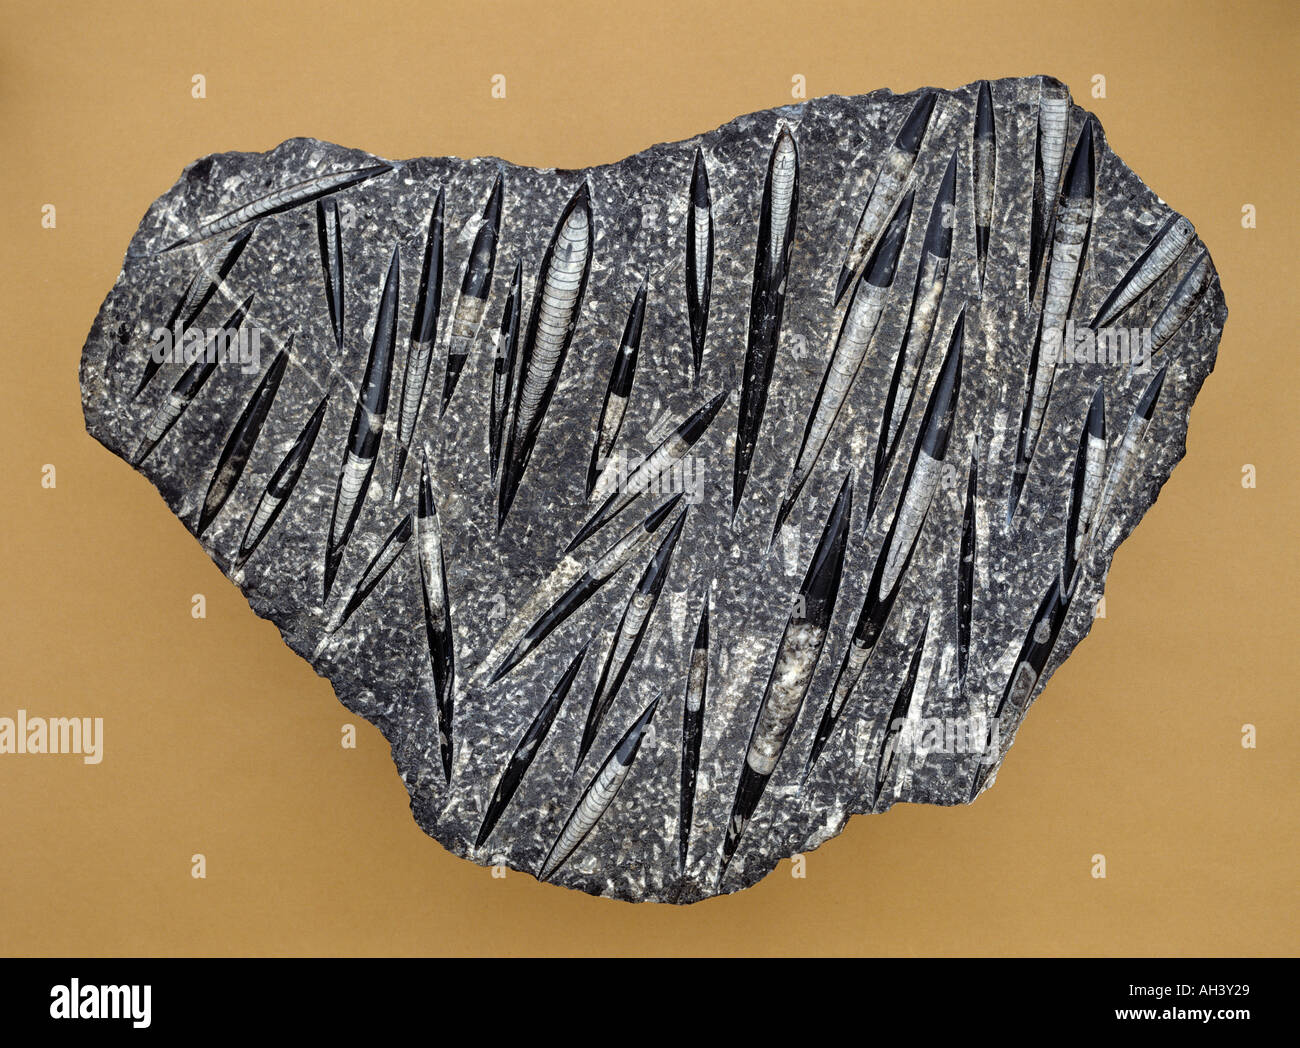 Orthoceras mollusc fossil slab 350 to 500 millions years old, fossil marine organisms Stock Photo